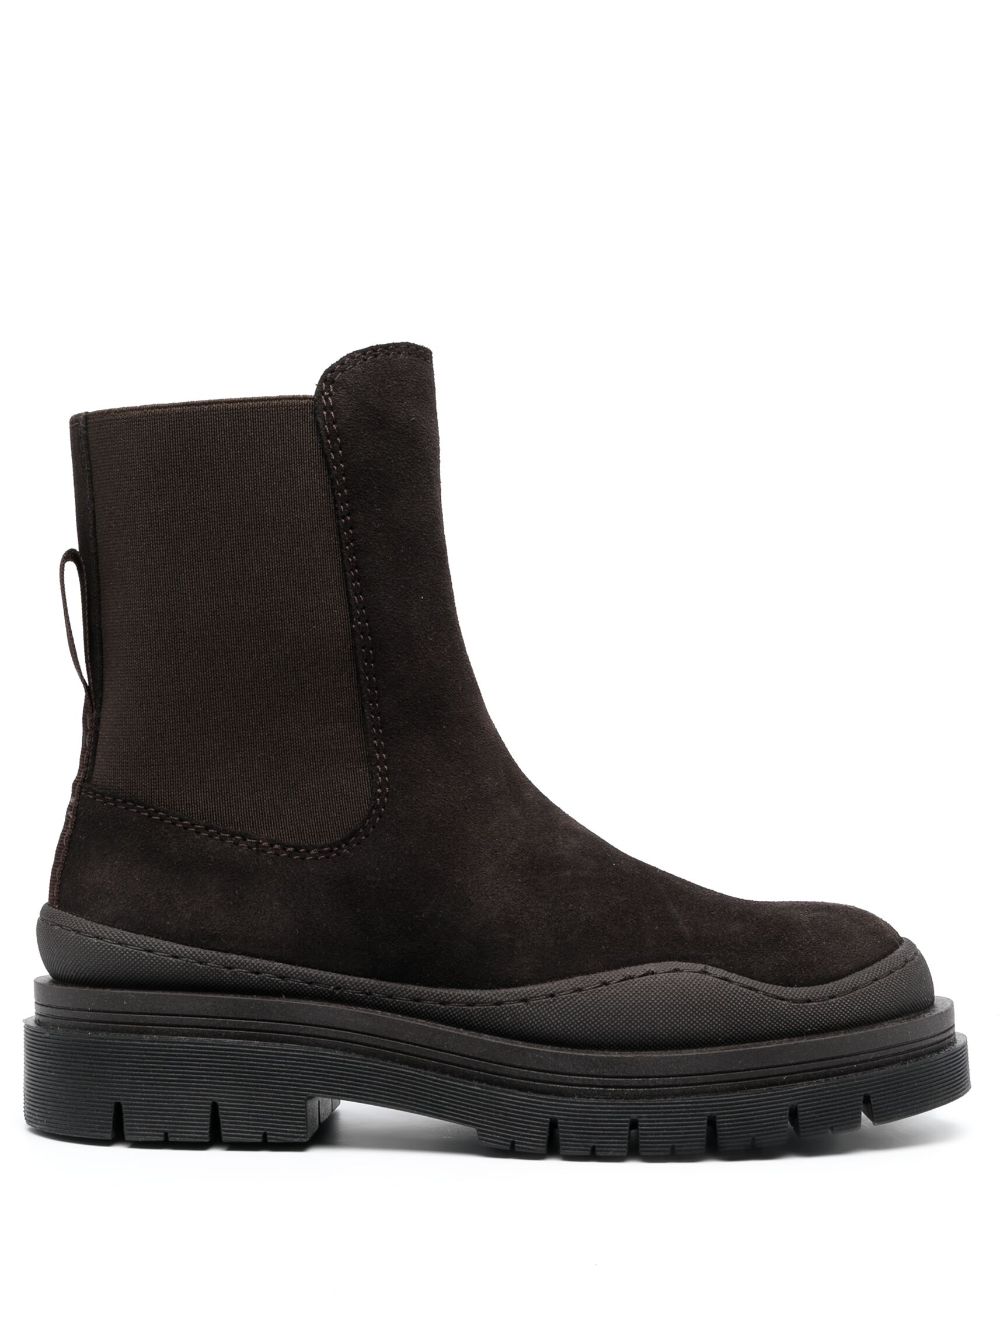 See By Chloé Alli Suede Ankle Boots In Brown